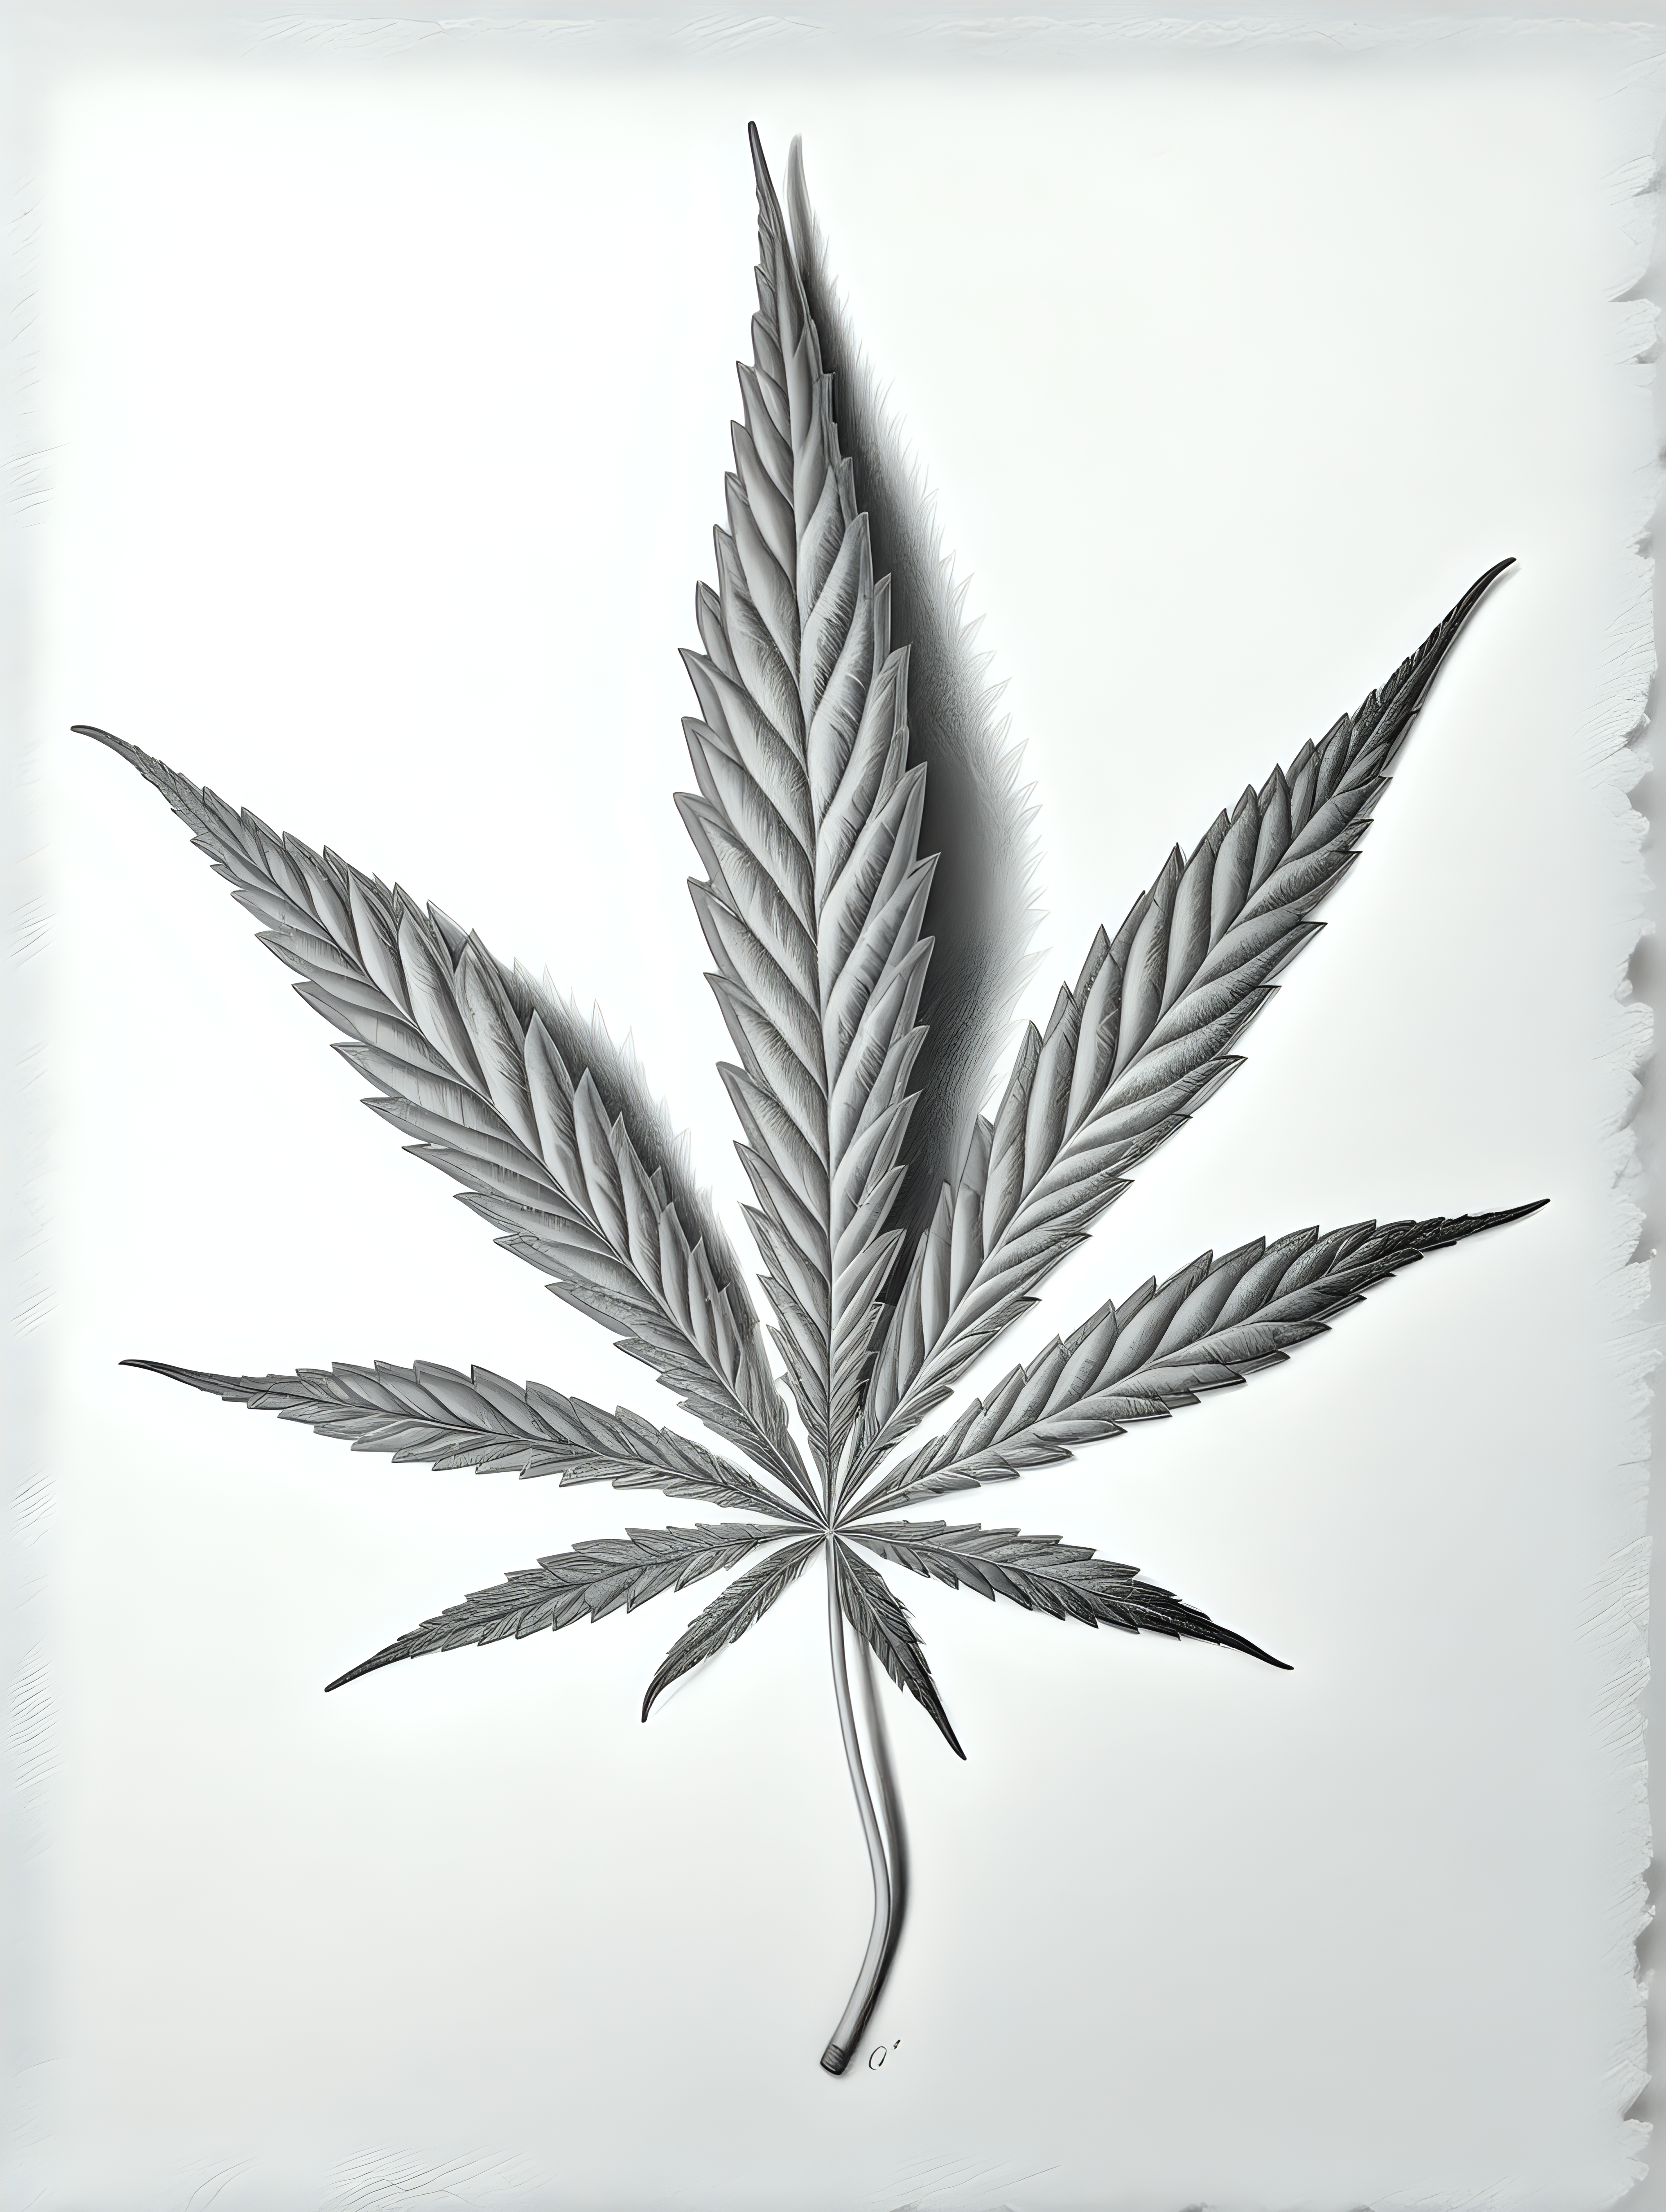 photo-realistic drawing of cannabis leaf. lead pencil and graphite on white textured-paper.